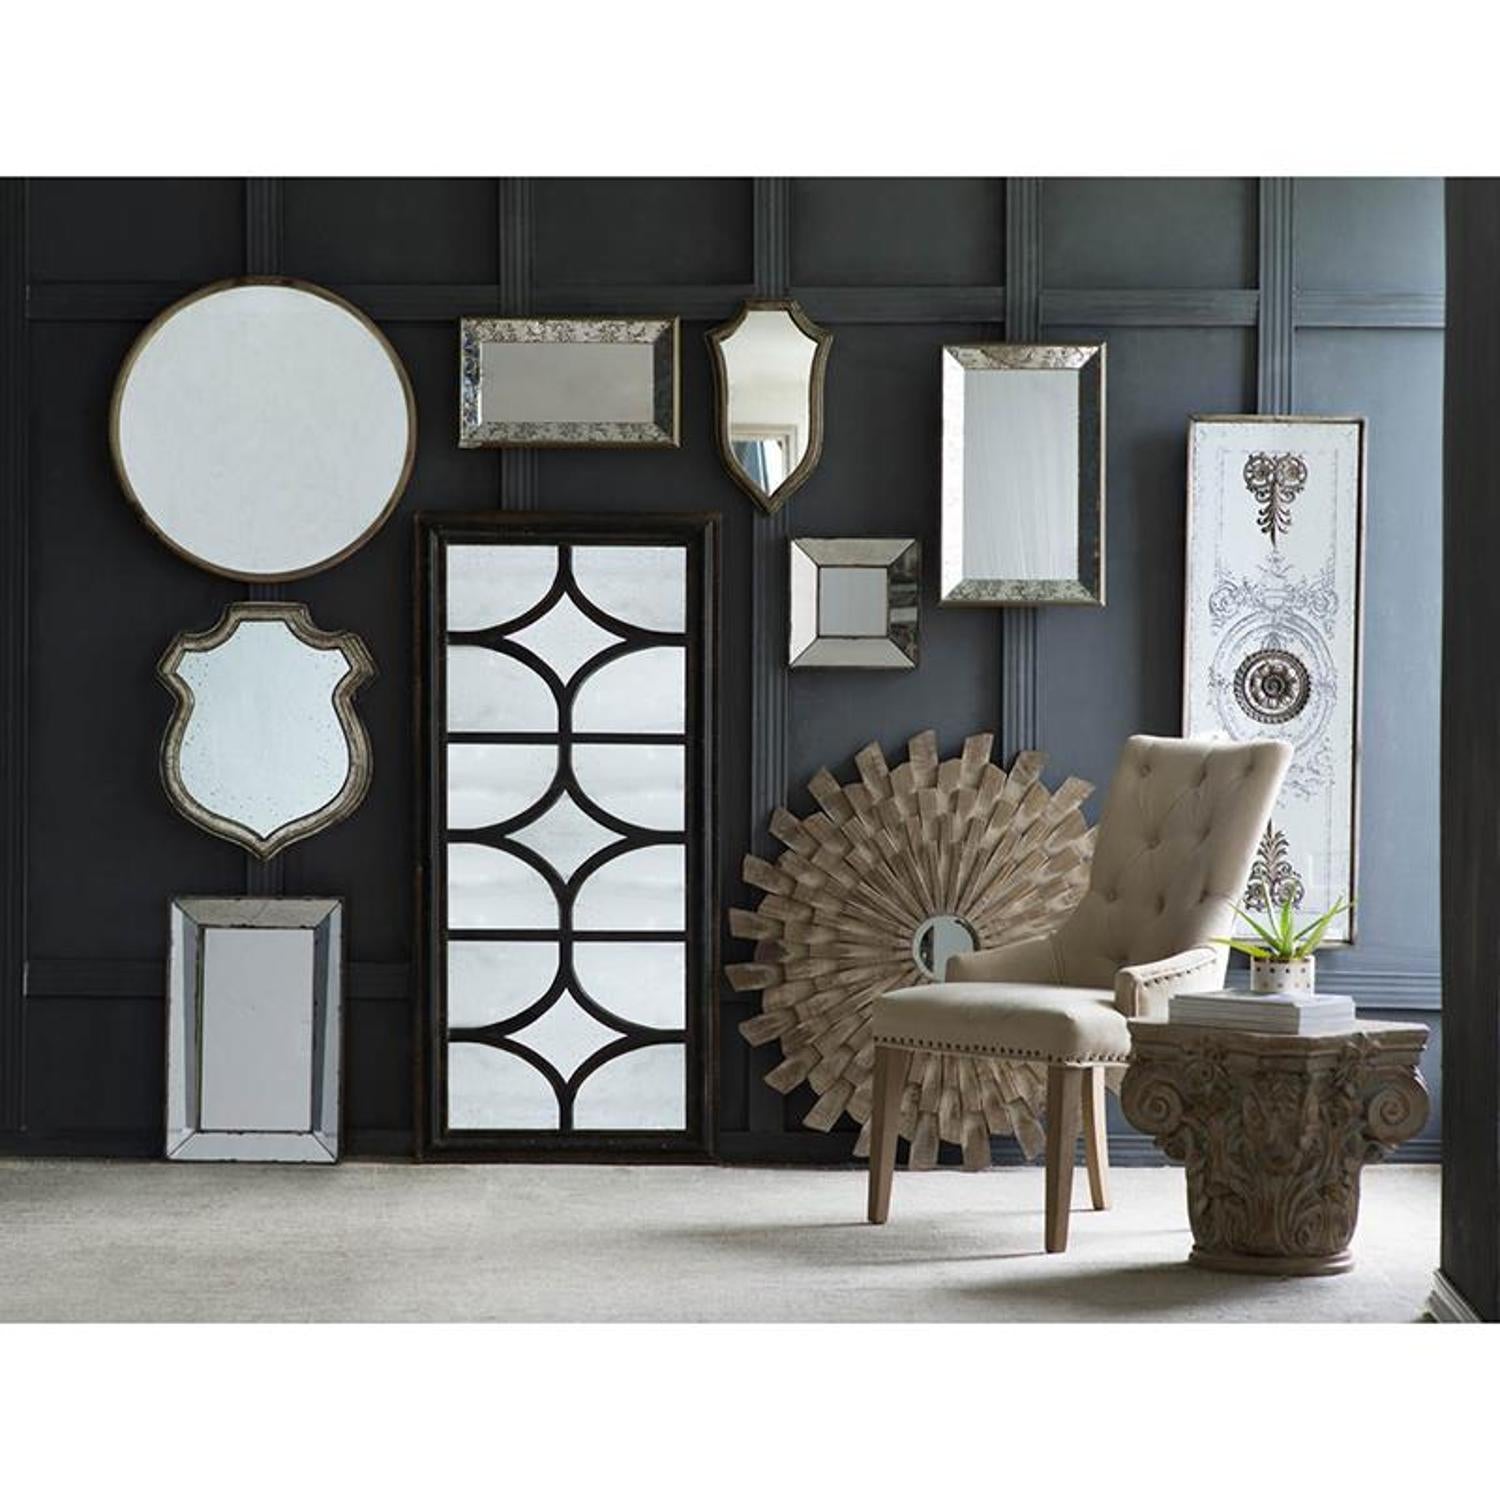 Distressed Metallic Crest Shape Accent Wall Mirror | 24